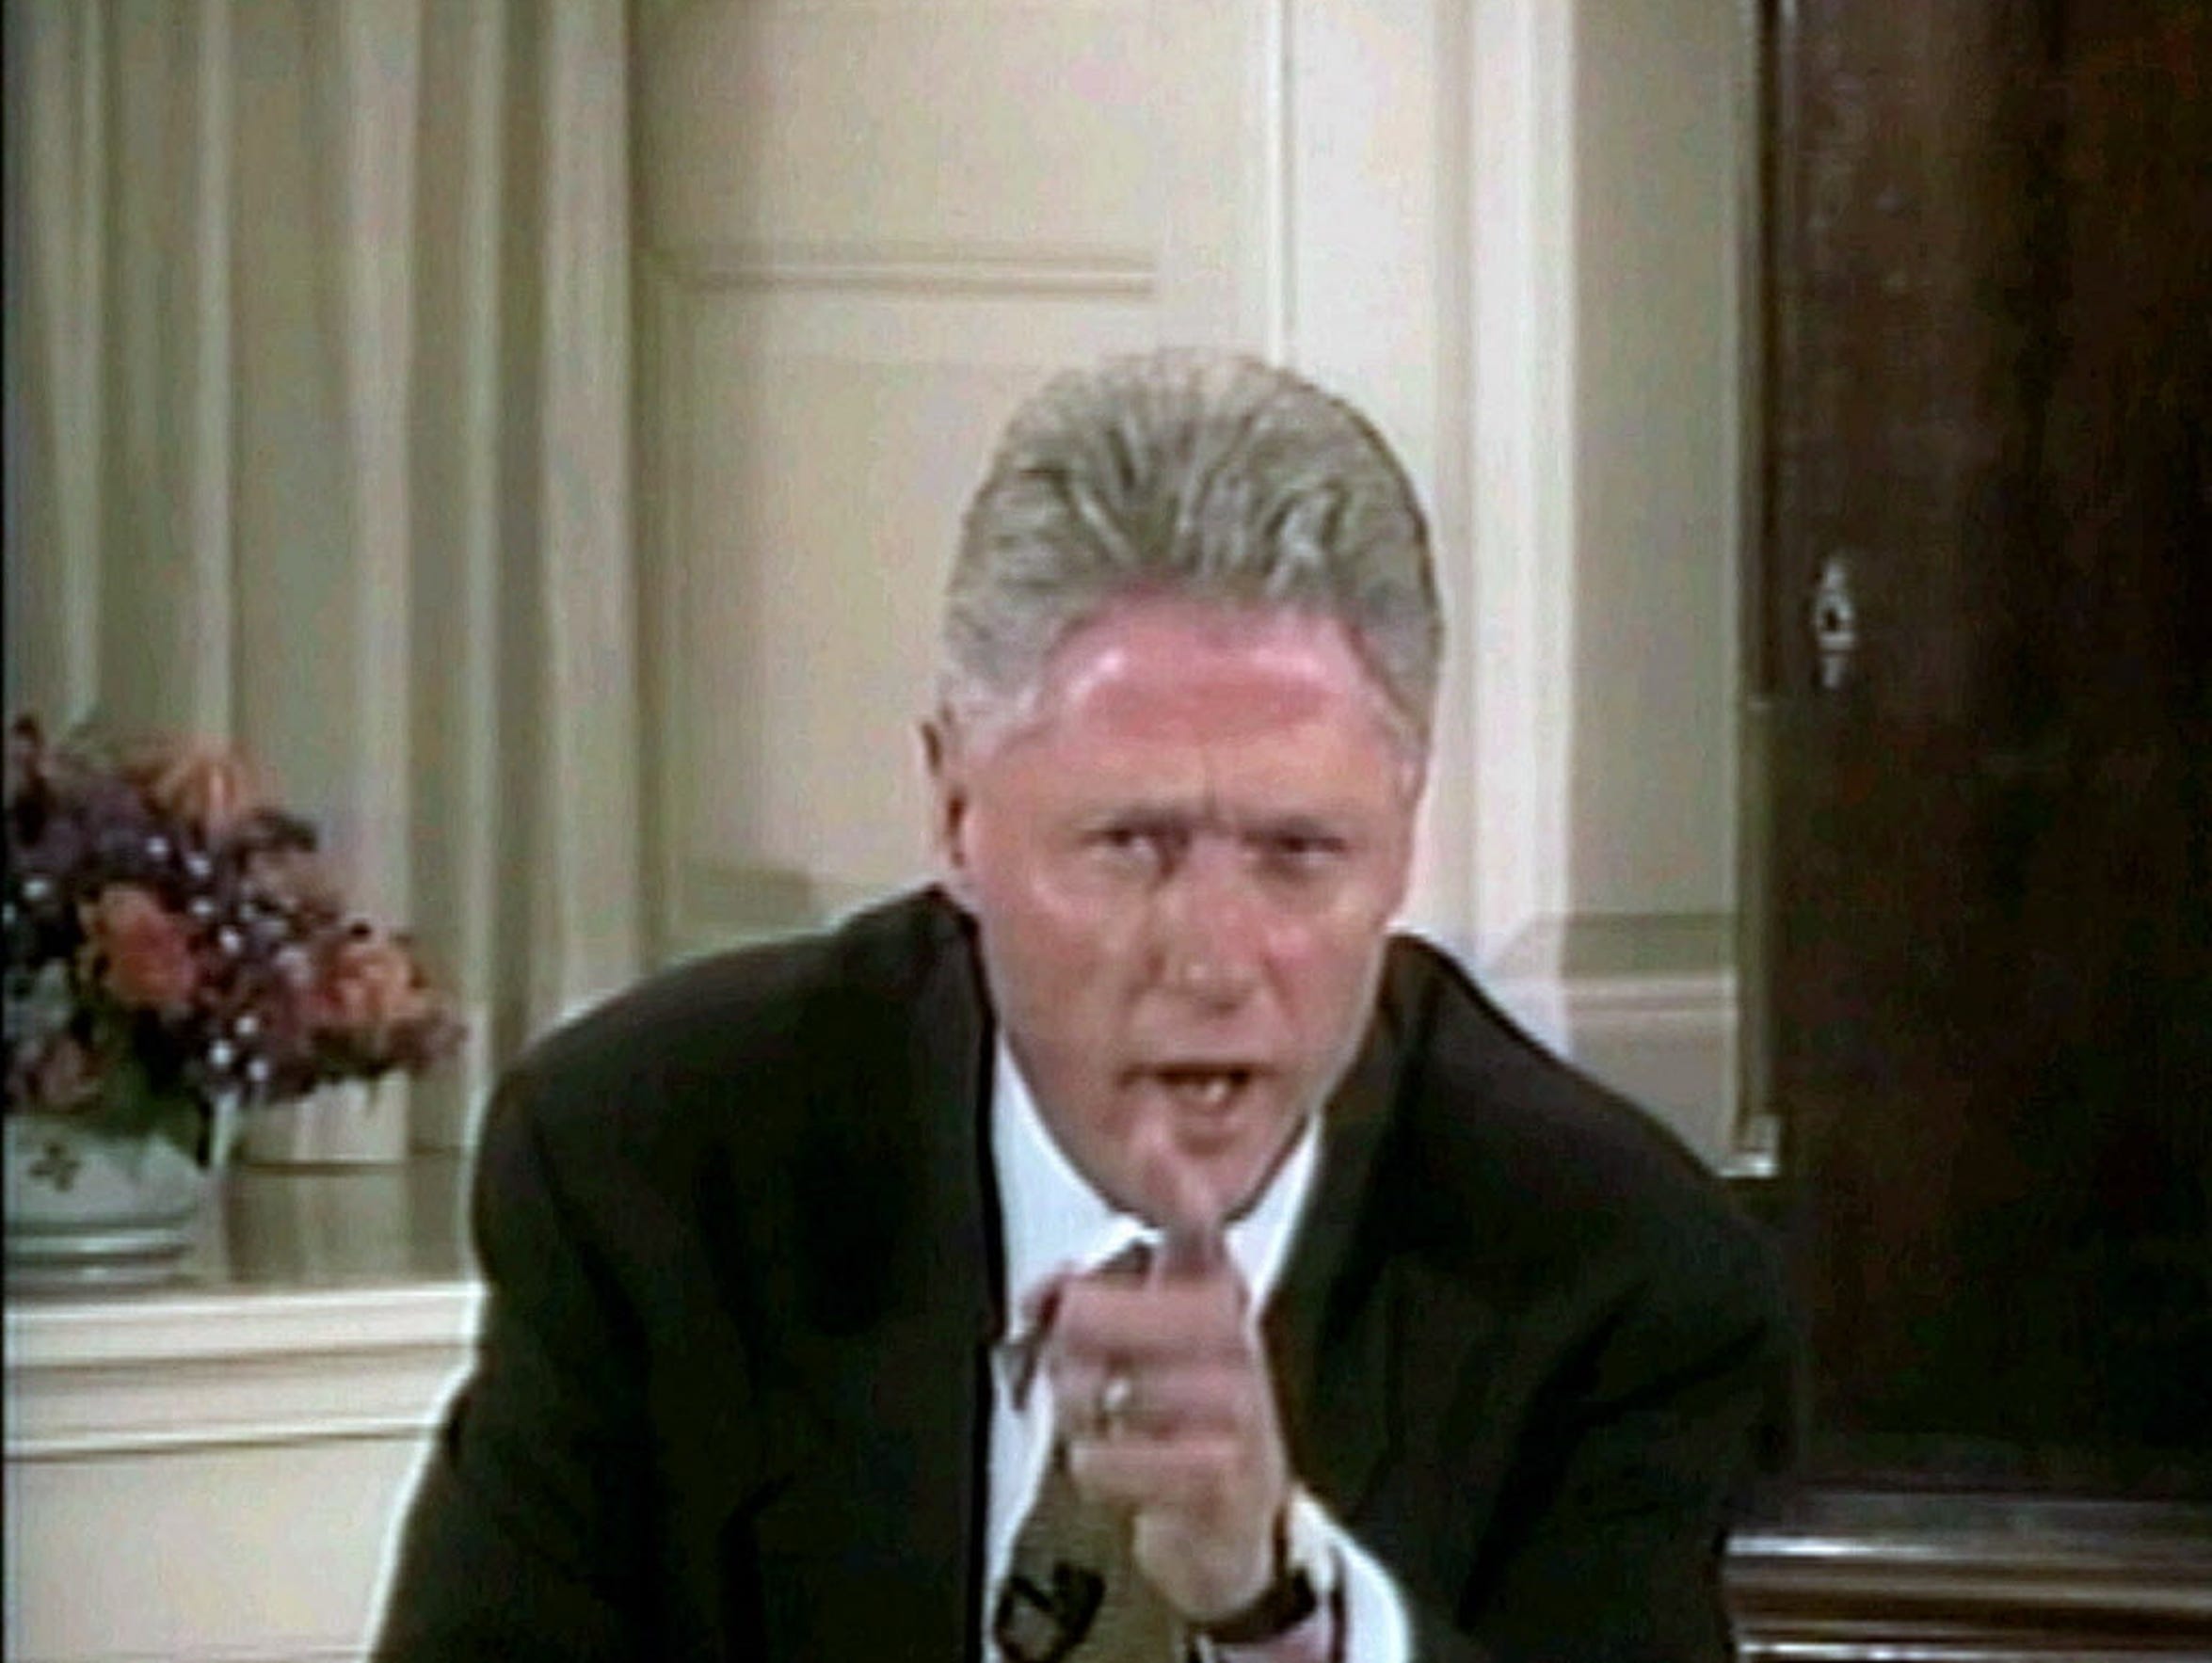 President Bill Clinton responds to a question on his